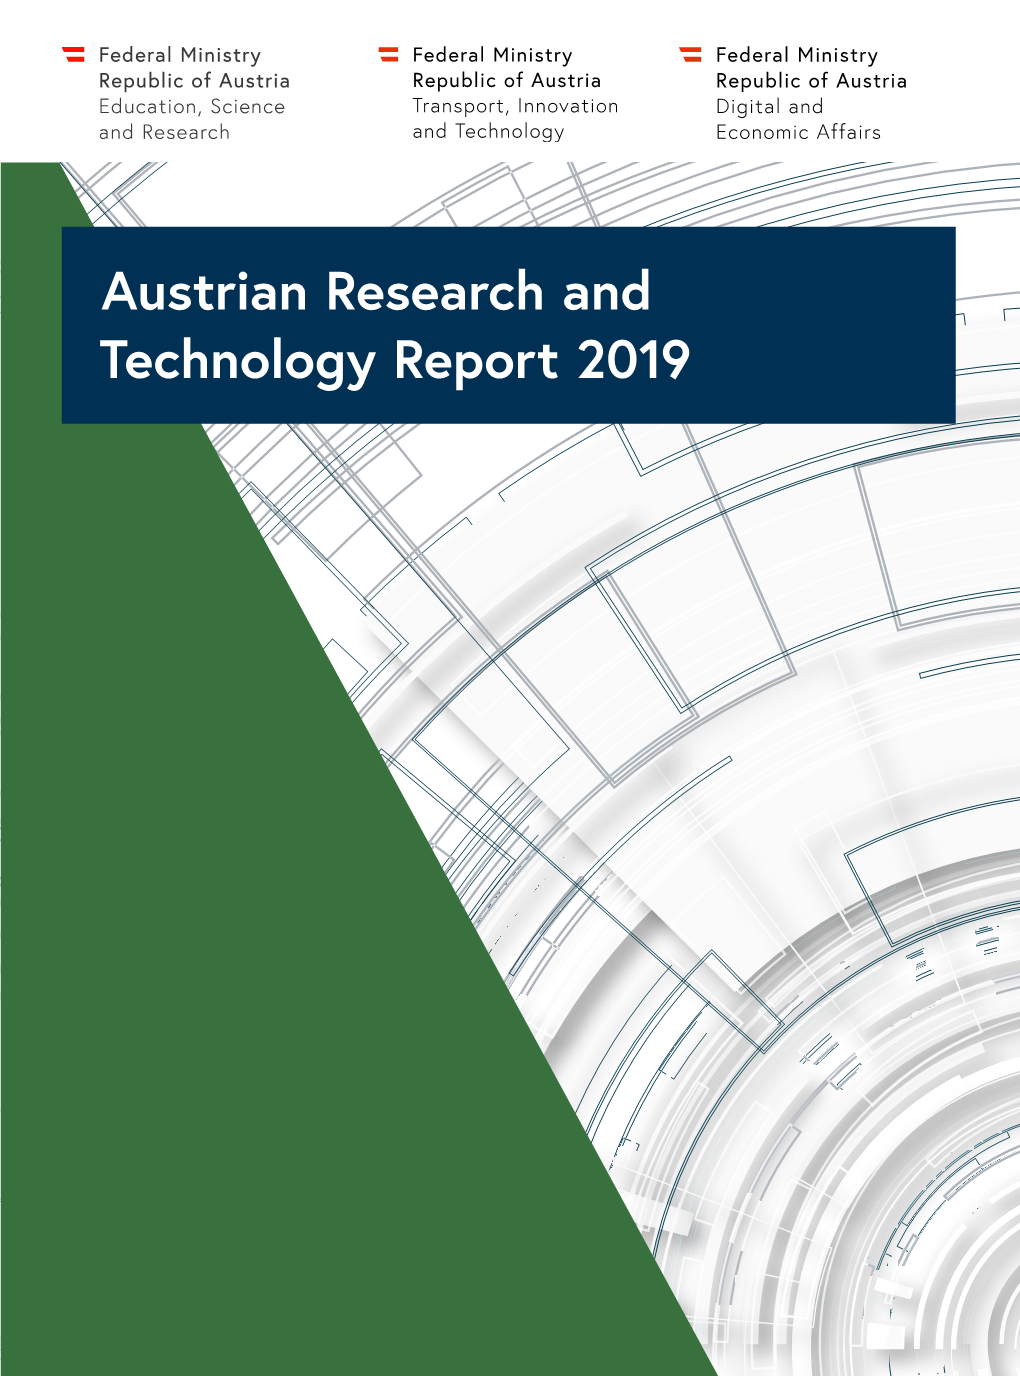 Austrian Research and Technology Report 2019